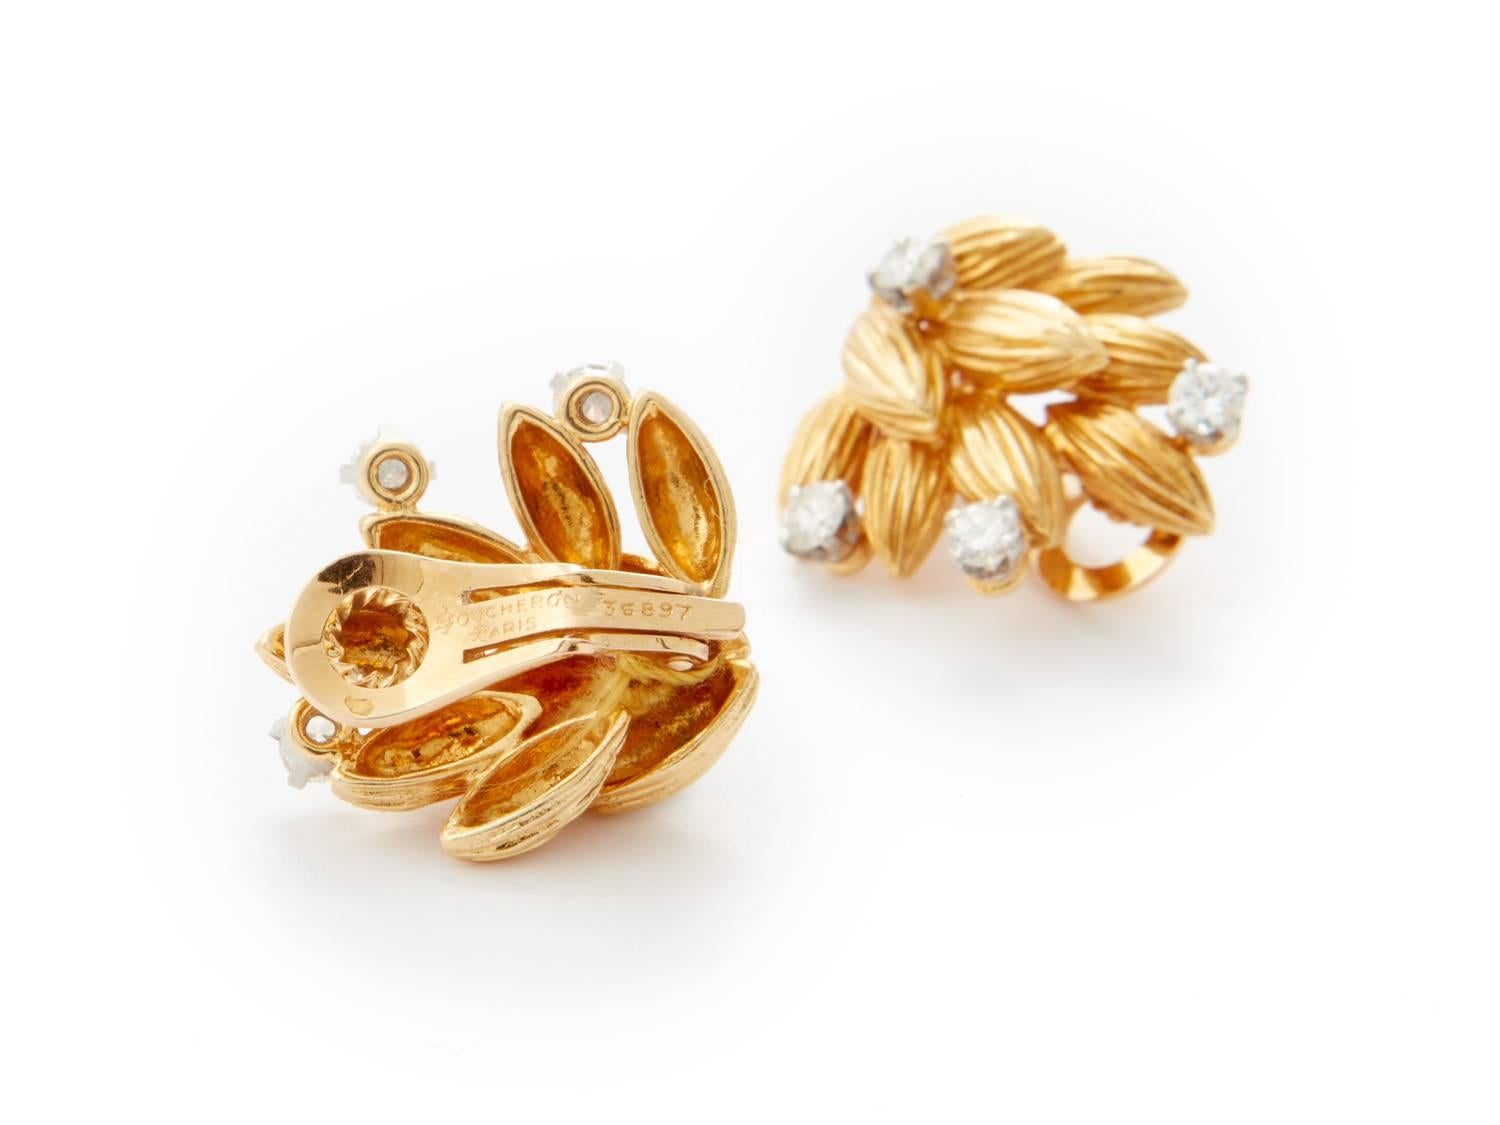 Boucheron Earrings (with clips), ca. 1970, shaped foliage bouquet embellished with brilliant-cut diamonds, stamped 'BOUCHERON PARIS' and french hallmark

18k gold with diamonds